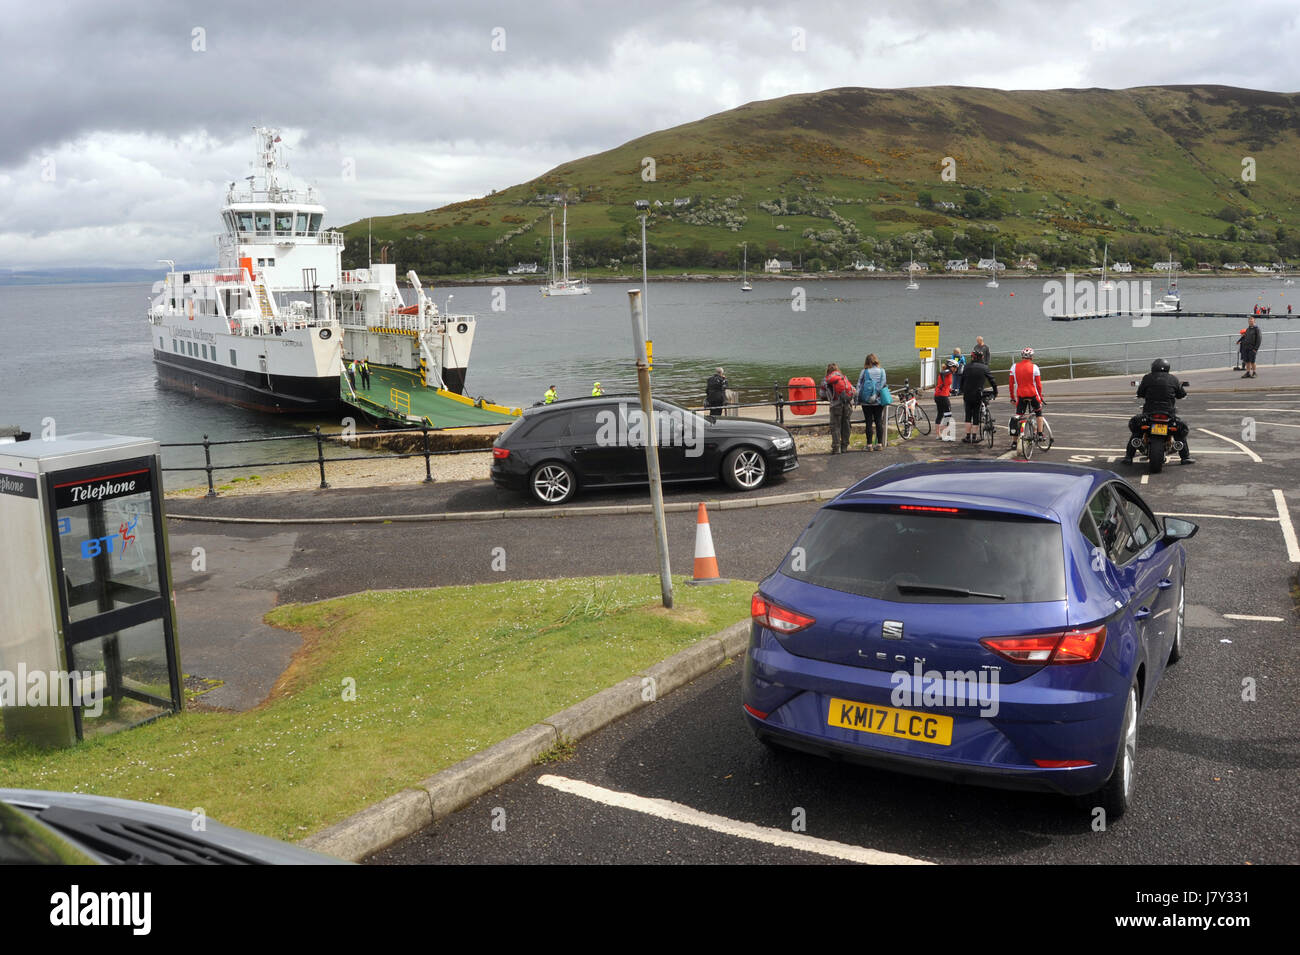 THE 'CATRIONA' FERRY BOAT AT THE FERRY TERMINAL OF LOCHRANZA ON THE ISLE OF ARRAN SCOTLAND UK Stock Photo